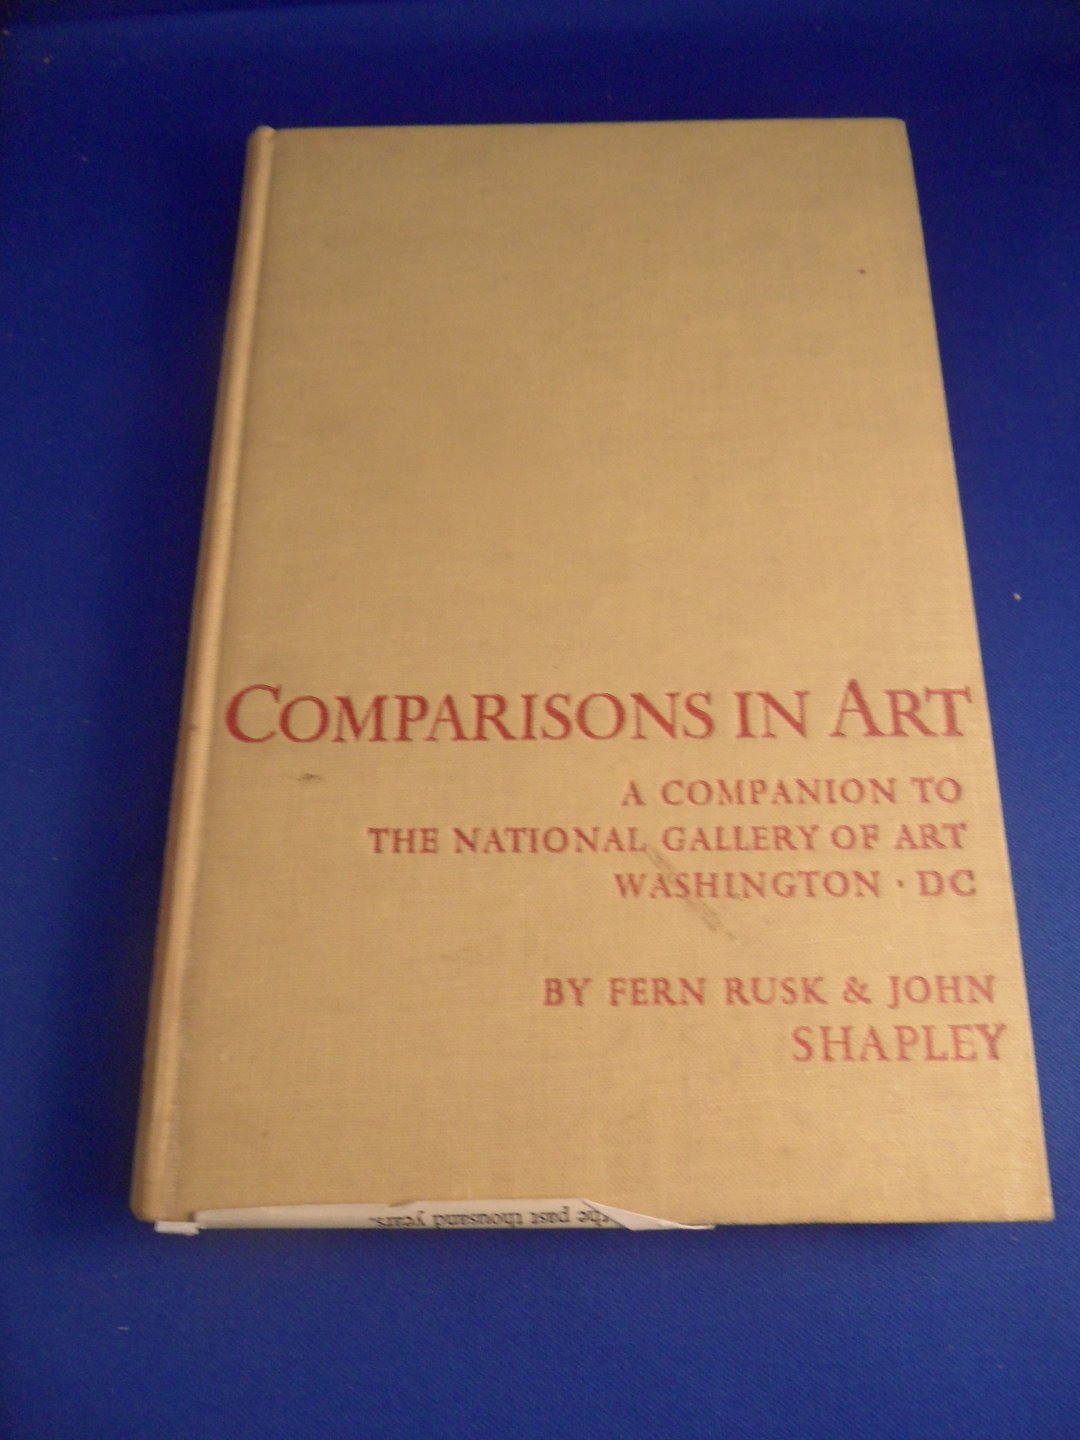 Rusk, Fern and Shapley, John - Comparisons in Art. A Companion to the National Gallery of Art Washington DC